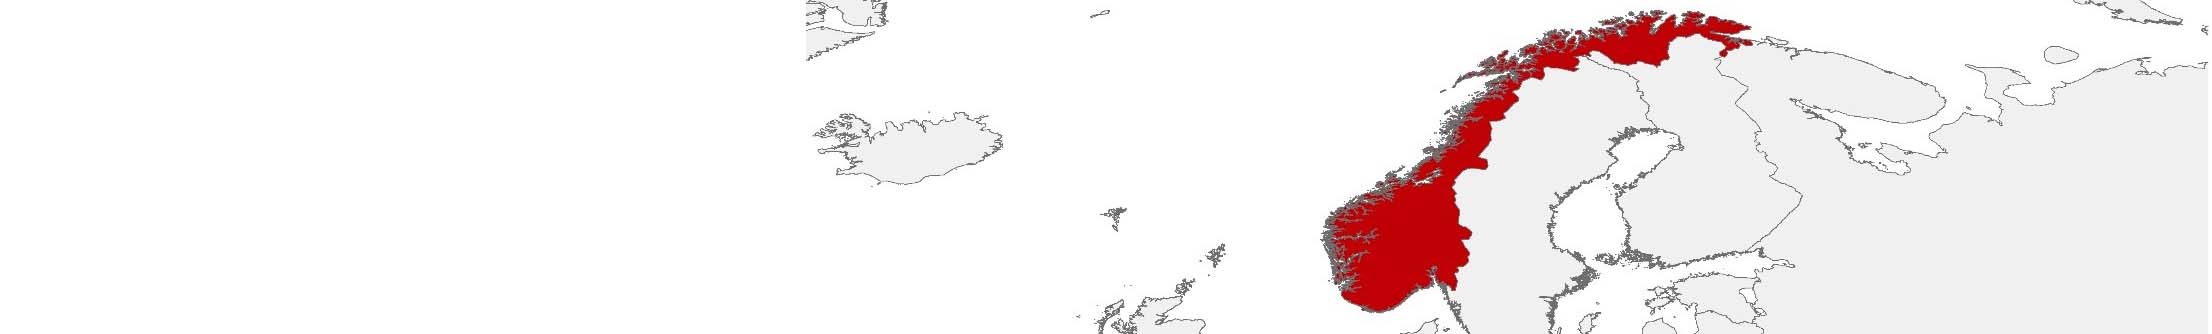 Purchasing power data and socio-demographic data can be displayed on a map of Norwegen using the following area boundaries: 100 x 100 m, PC 4-digit und Kommuner.